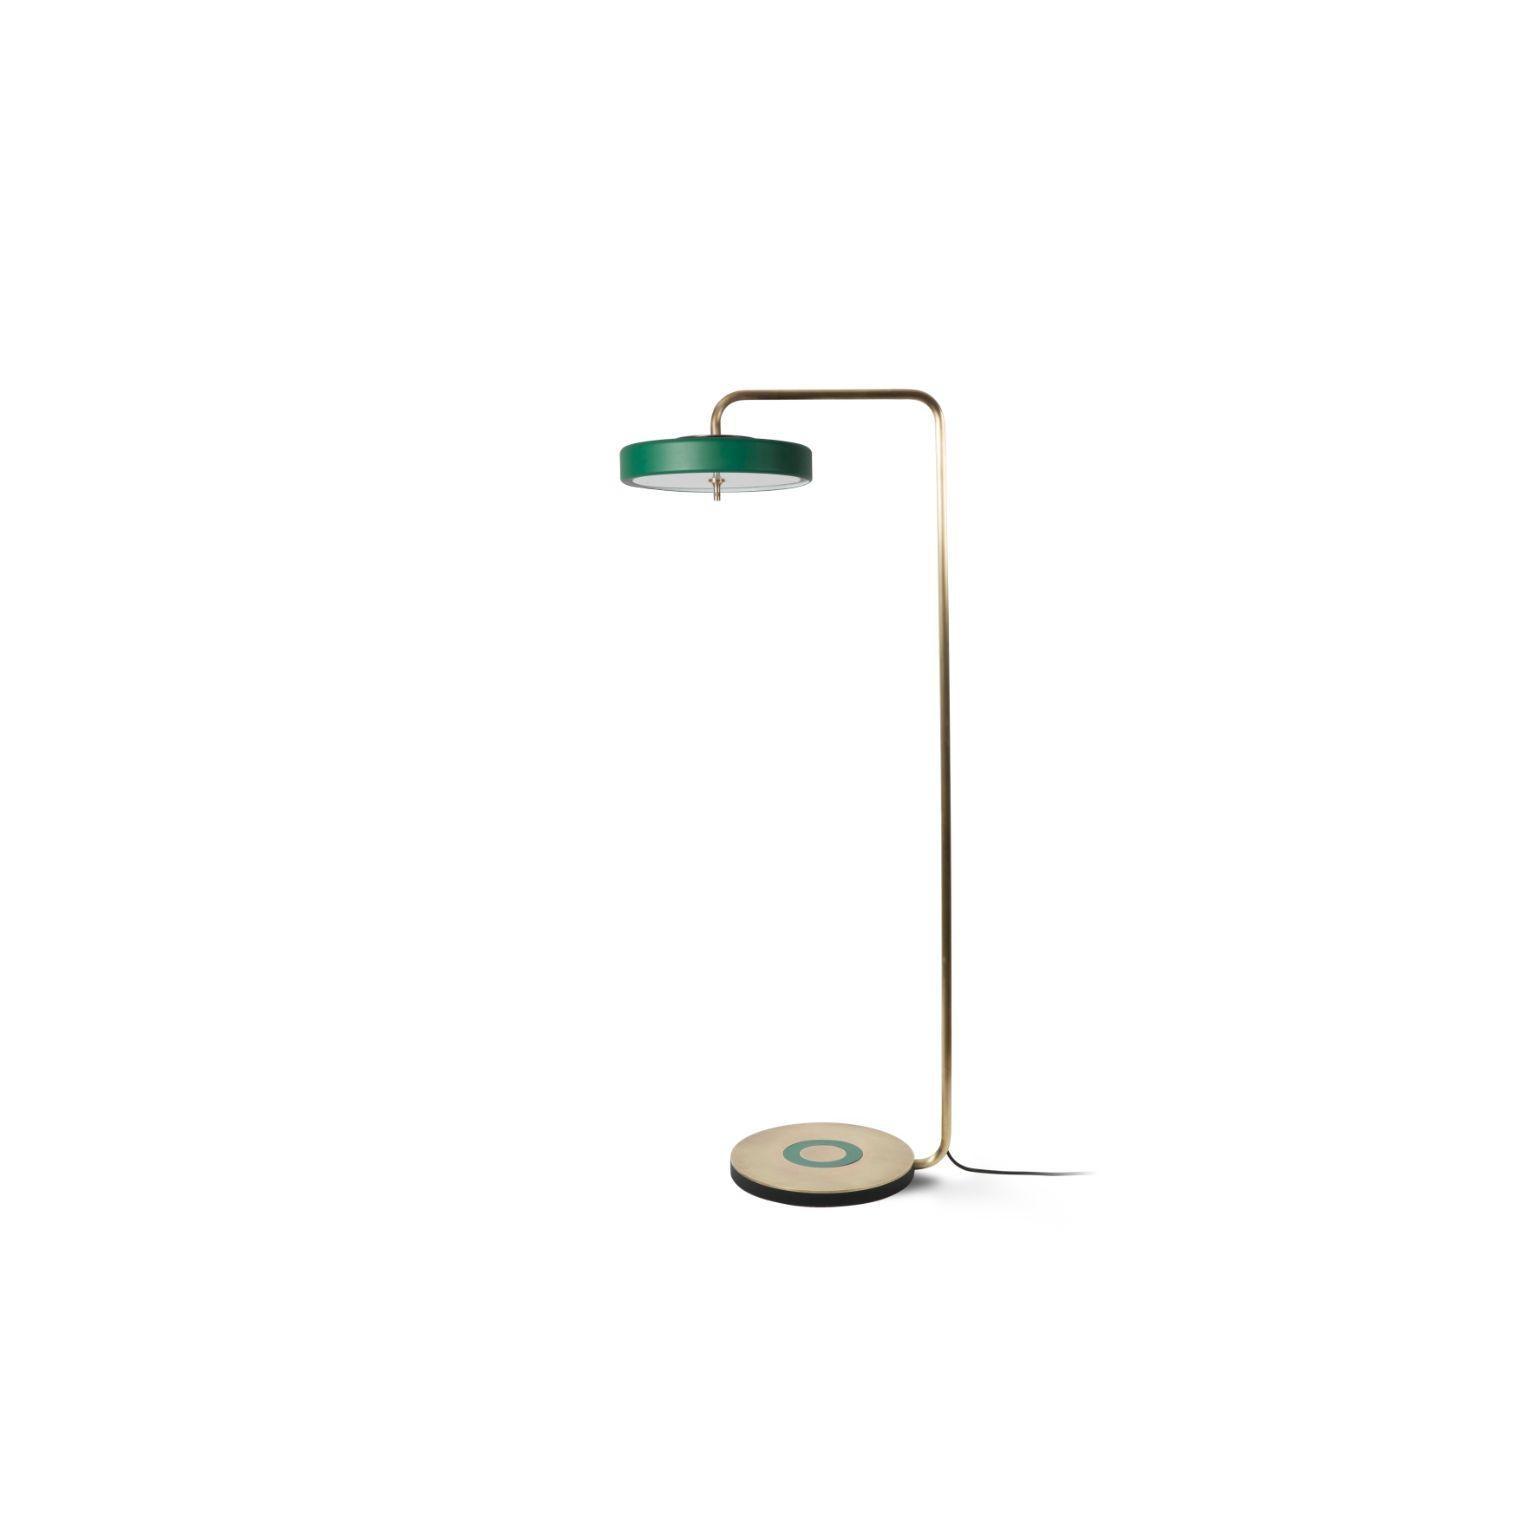 Revolve floor lamp - brushed brass - green by Bert Frank
Dimensions: 130 x 35.4 x 9.3 cm
Materials: Brass, steel

Also available in polished brass
When Adam Yeats and Robbie Llewellyn founded Bert Frank in 2013 it was a meeting of minds and the